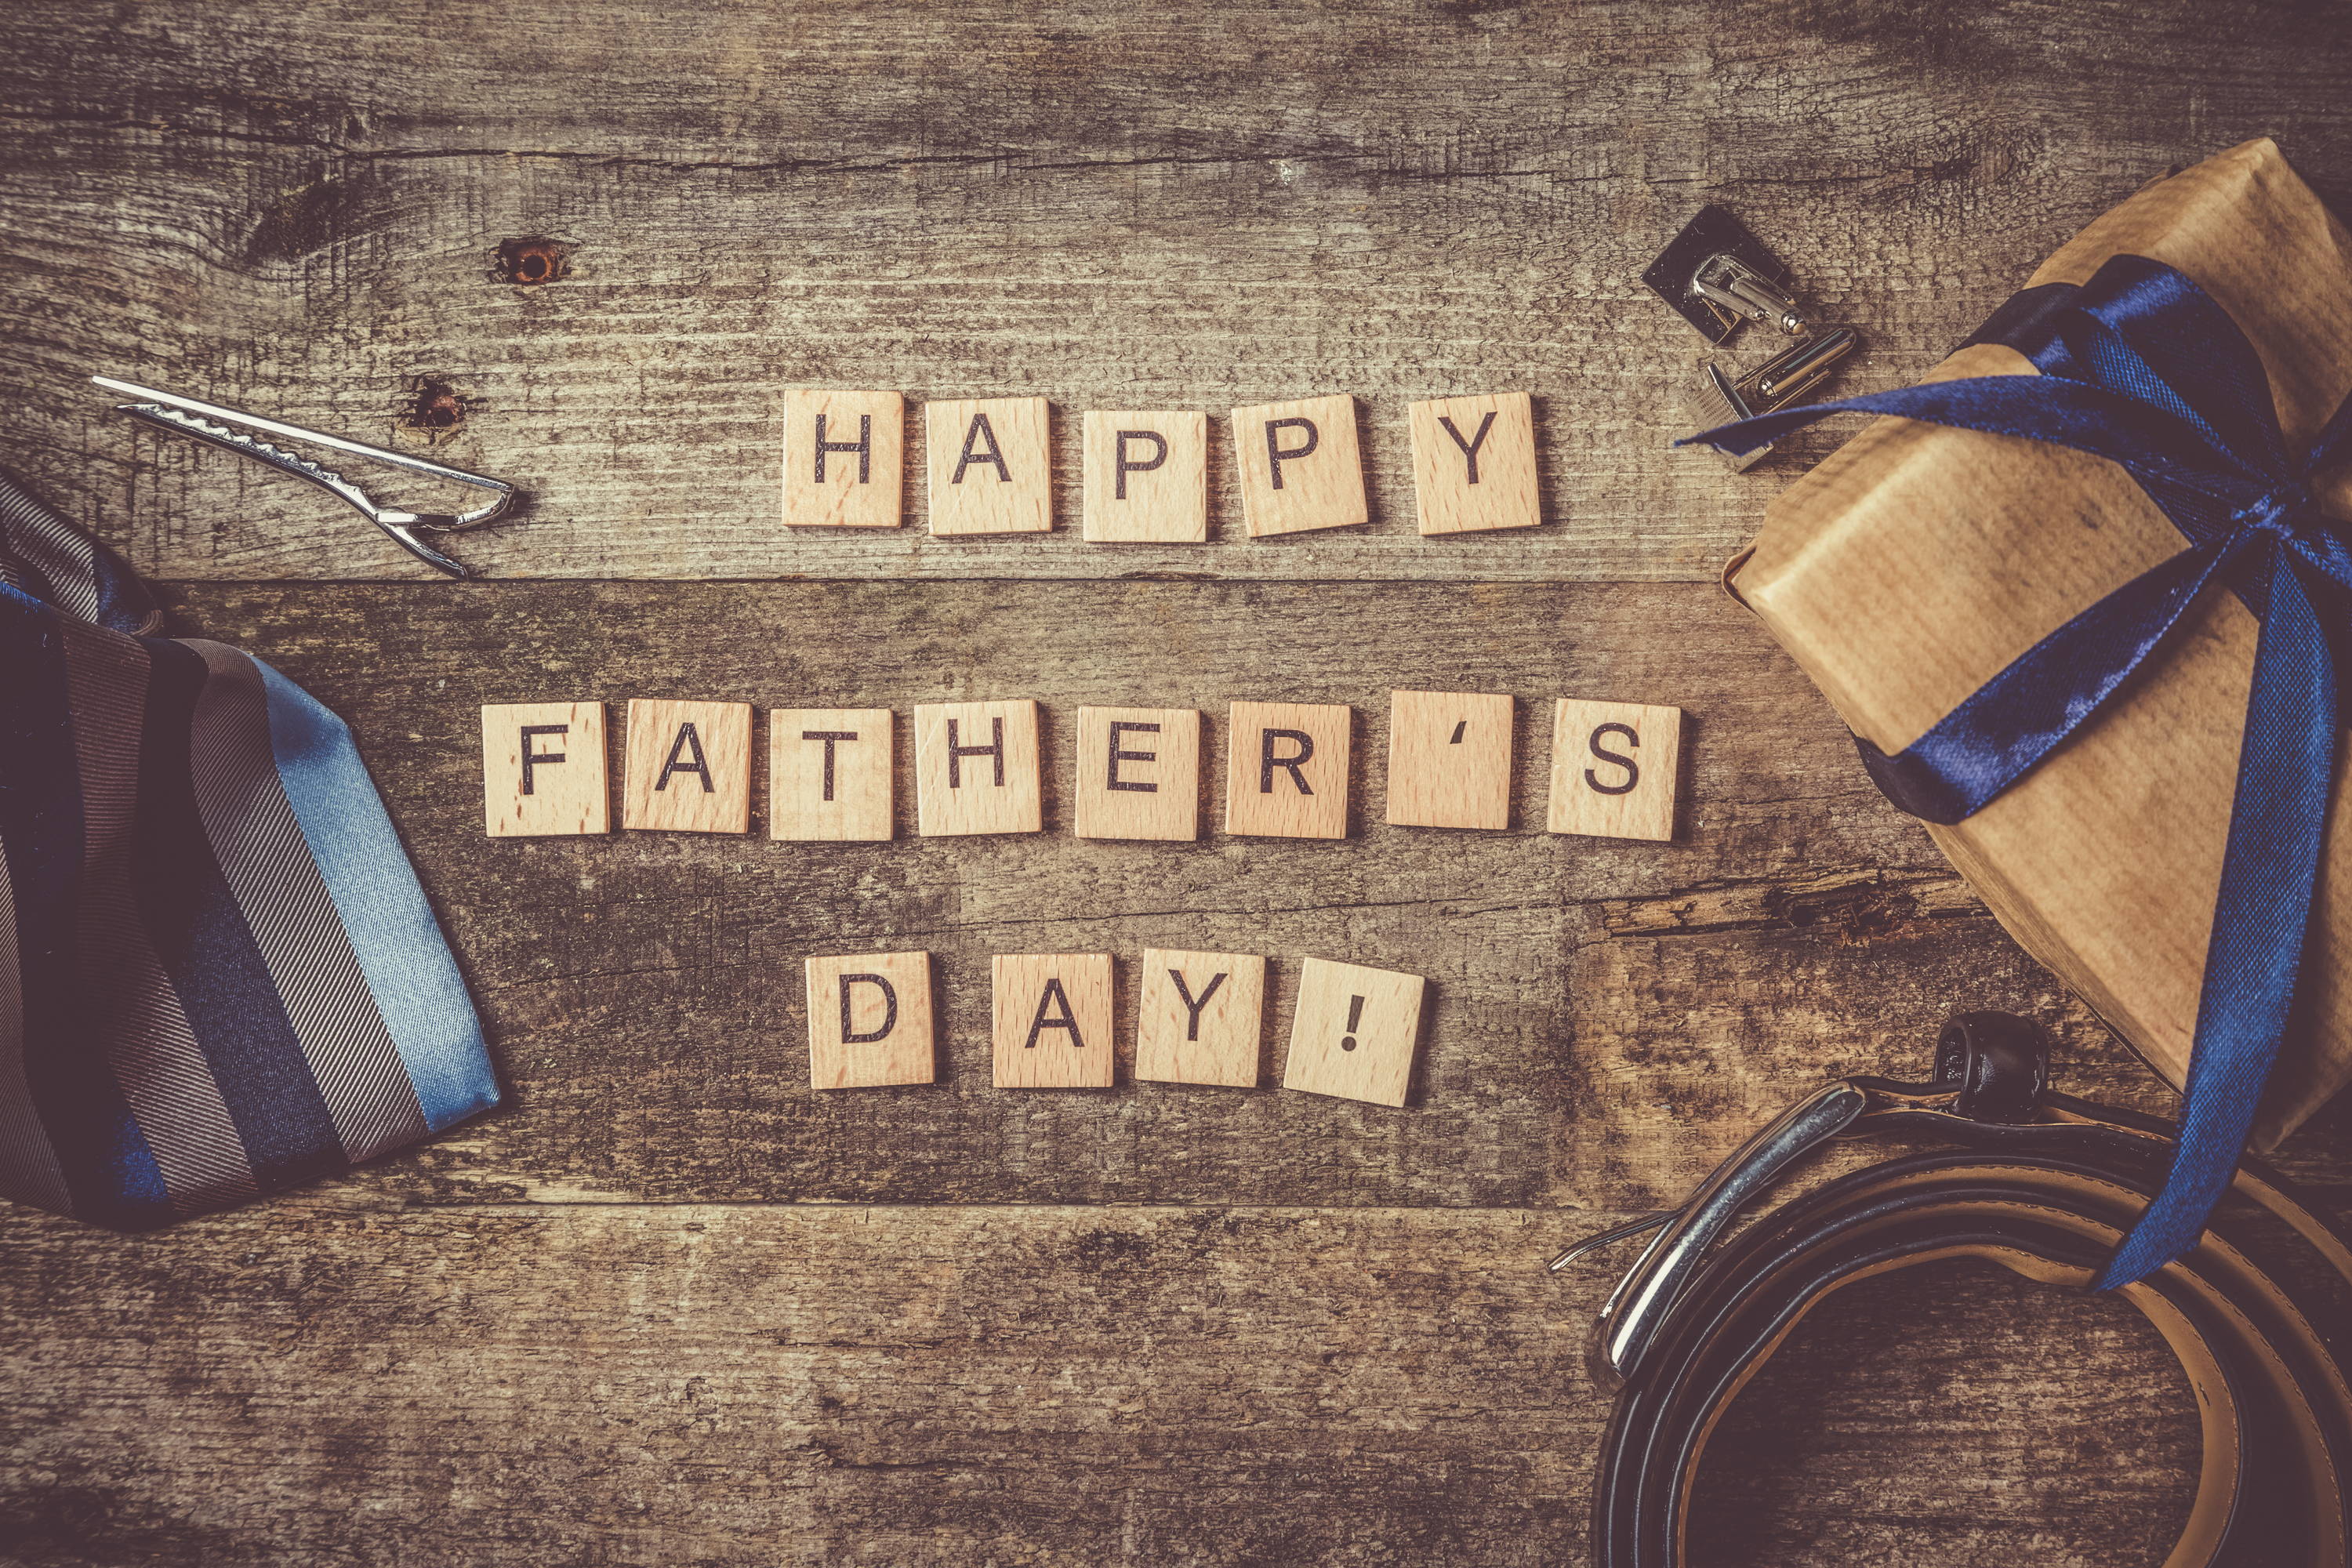 Top 10 Father's Day Gift Ideas